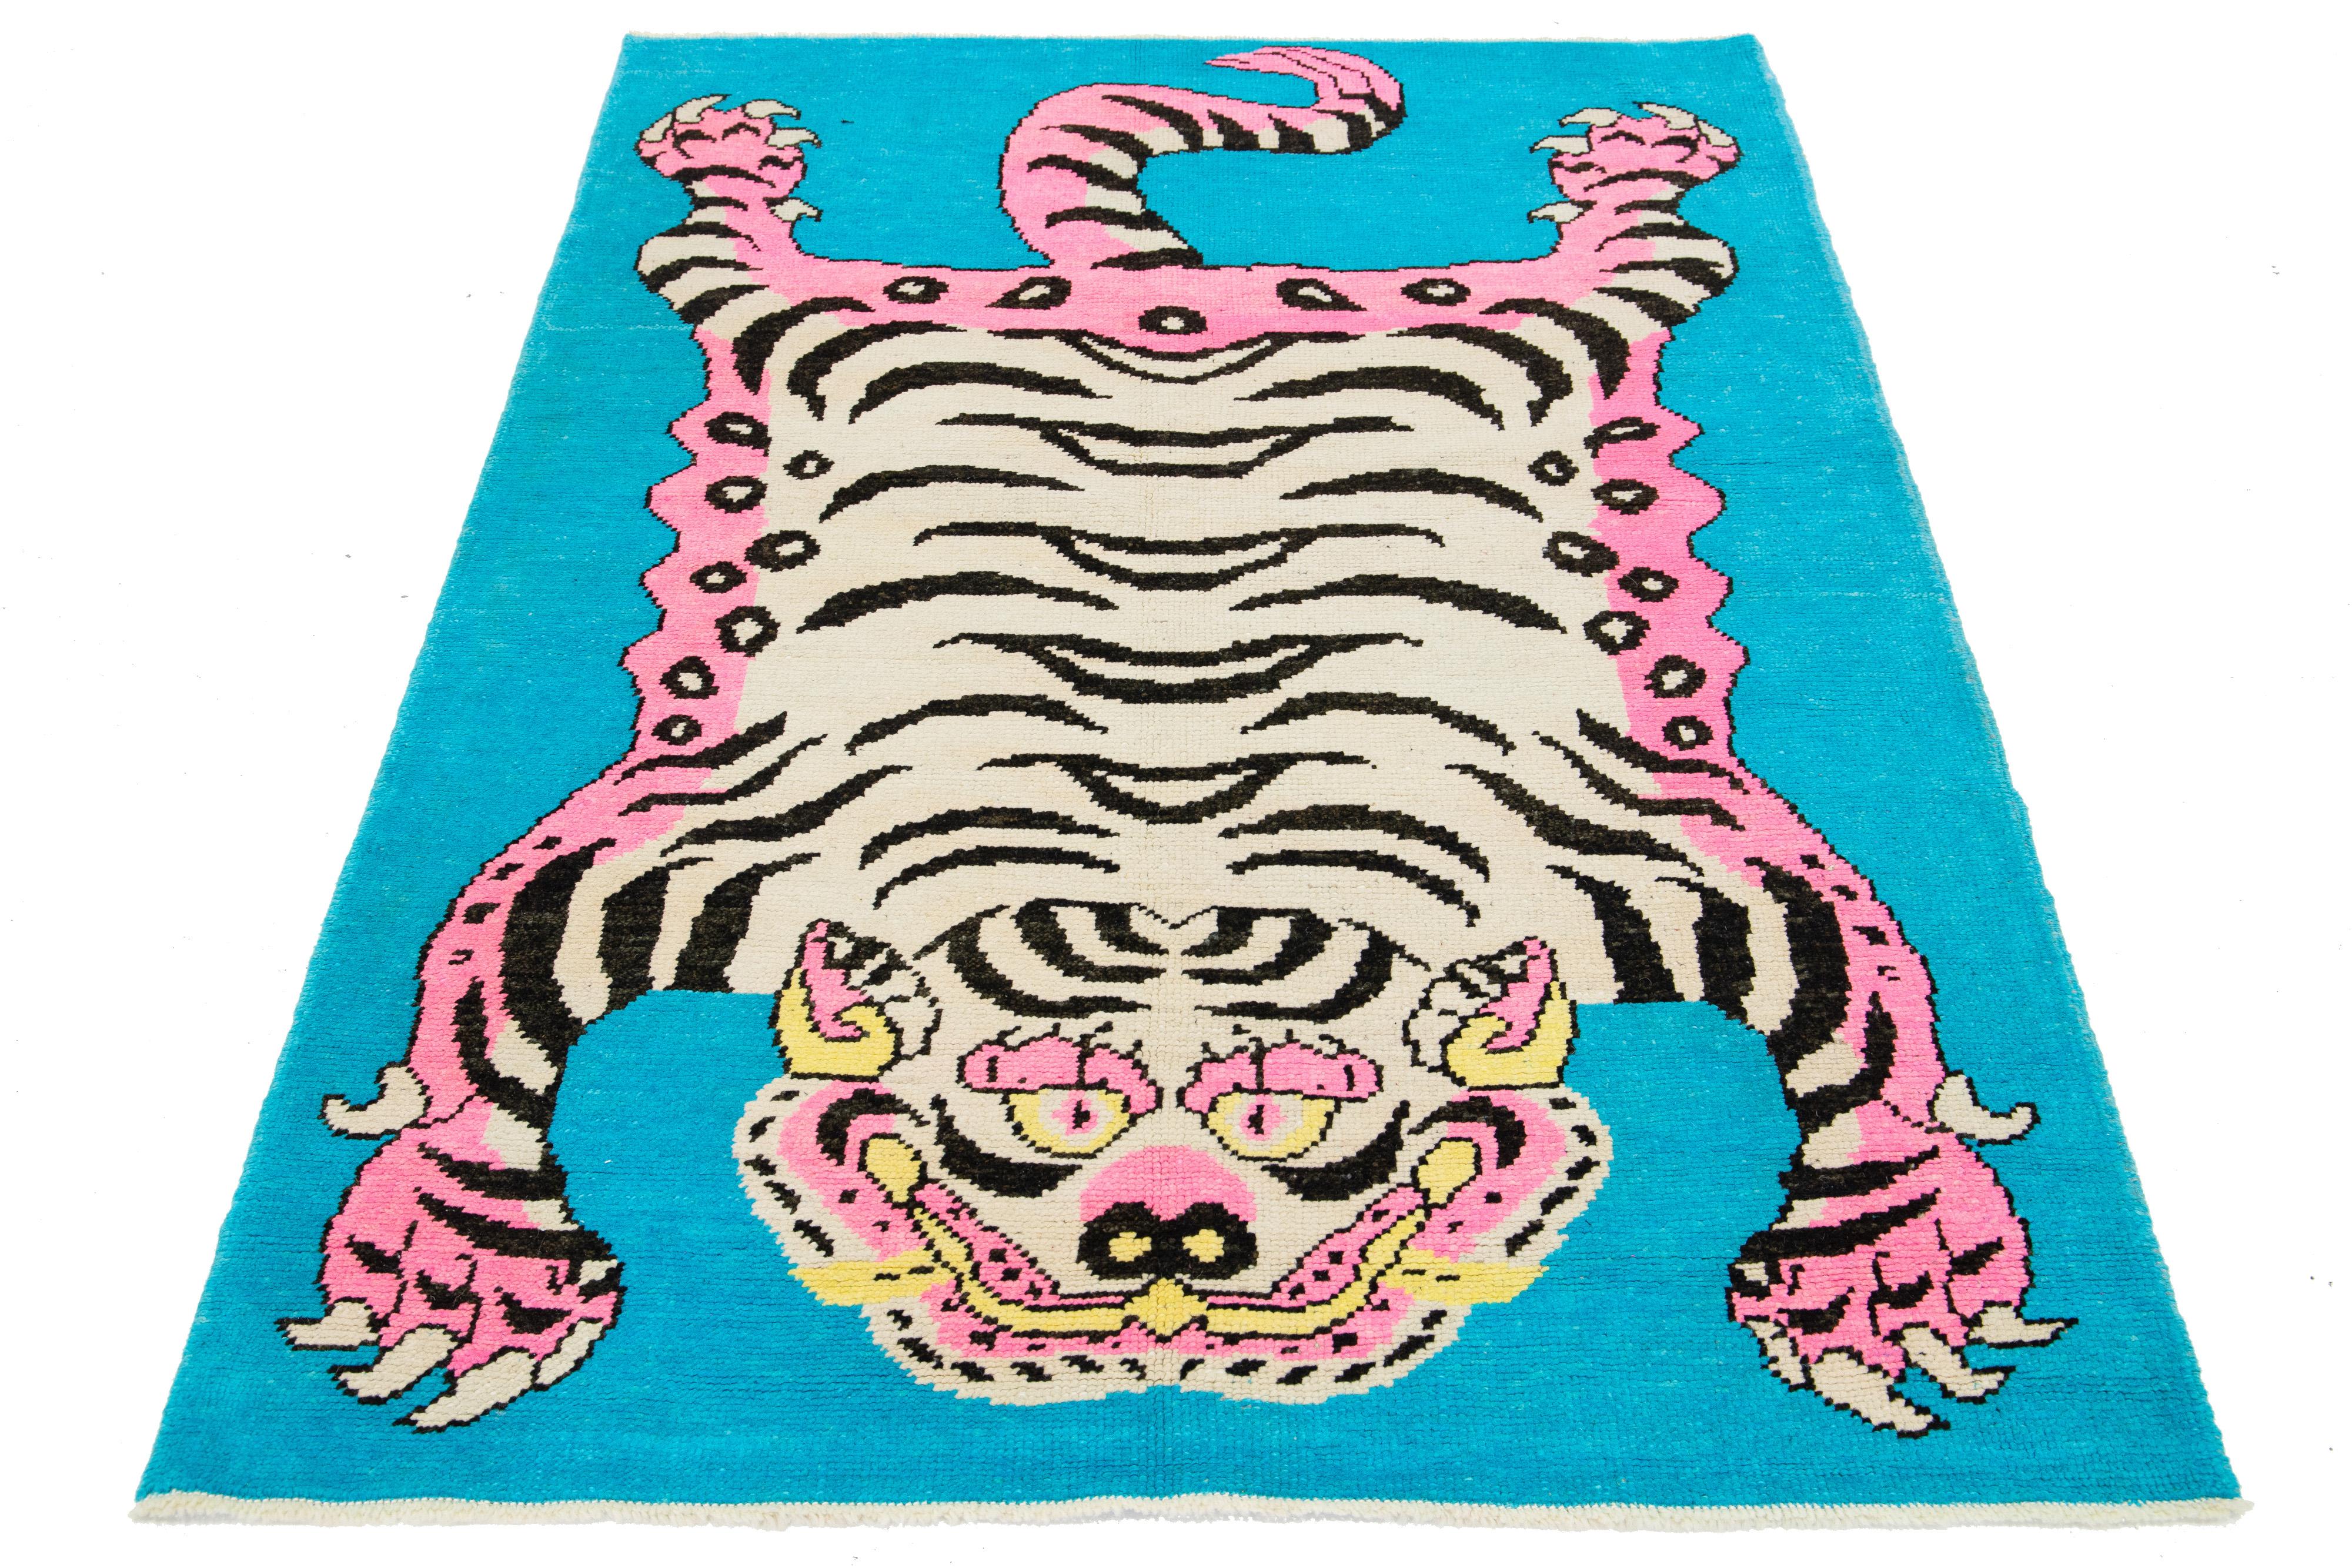 This Turkish Art Deco wool rug features a beautiful tiger pictorial design with a blue field and pink and beige accent colors, all handmade with care.

This rug measures 4'9